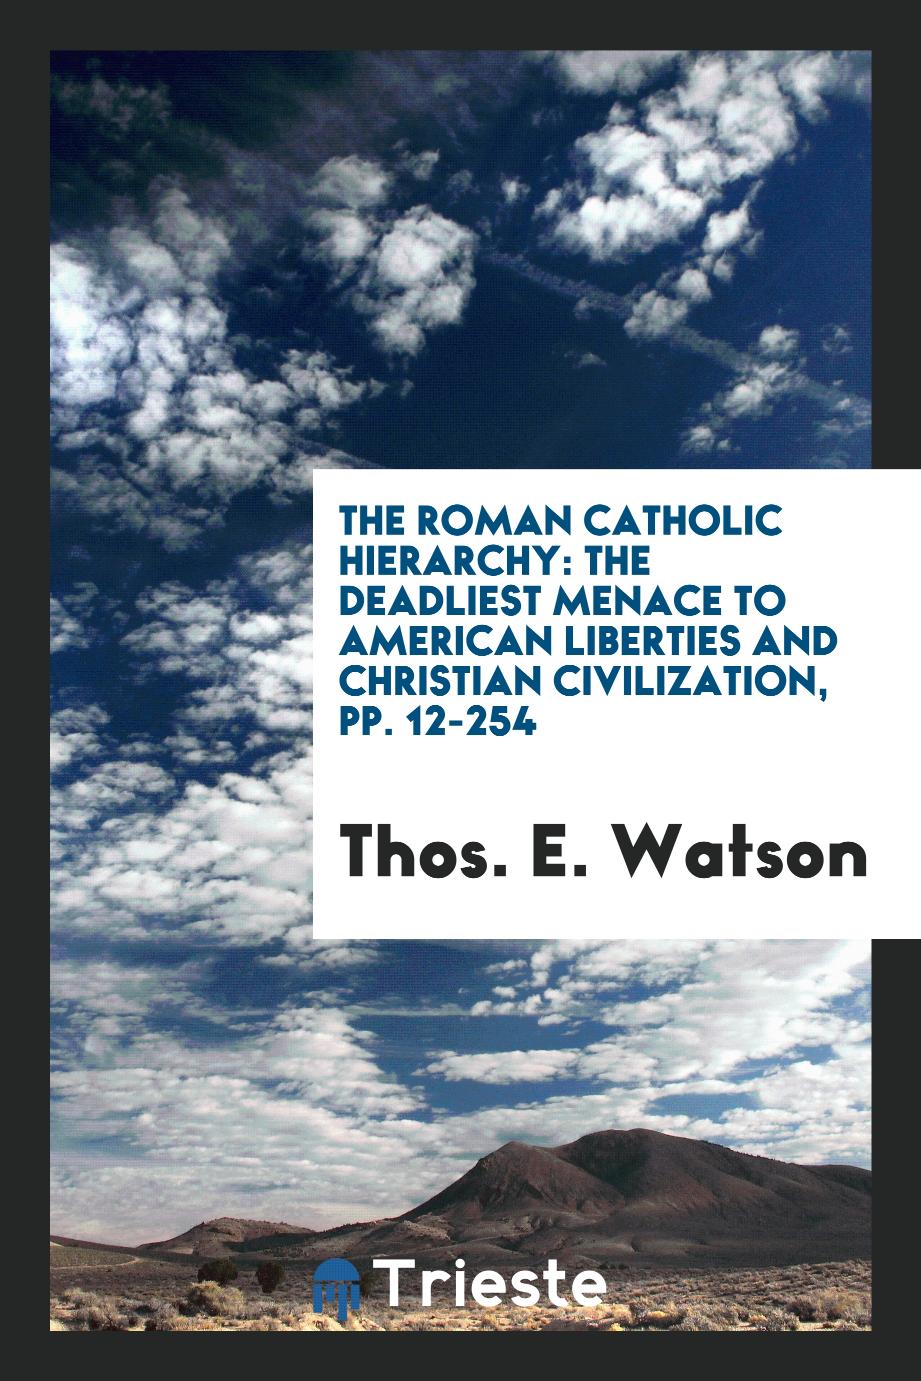 The Roman Catholic Hierarchy: The Deadliest Menace to American Liberties and Christian Civilization, pp. 12-254